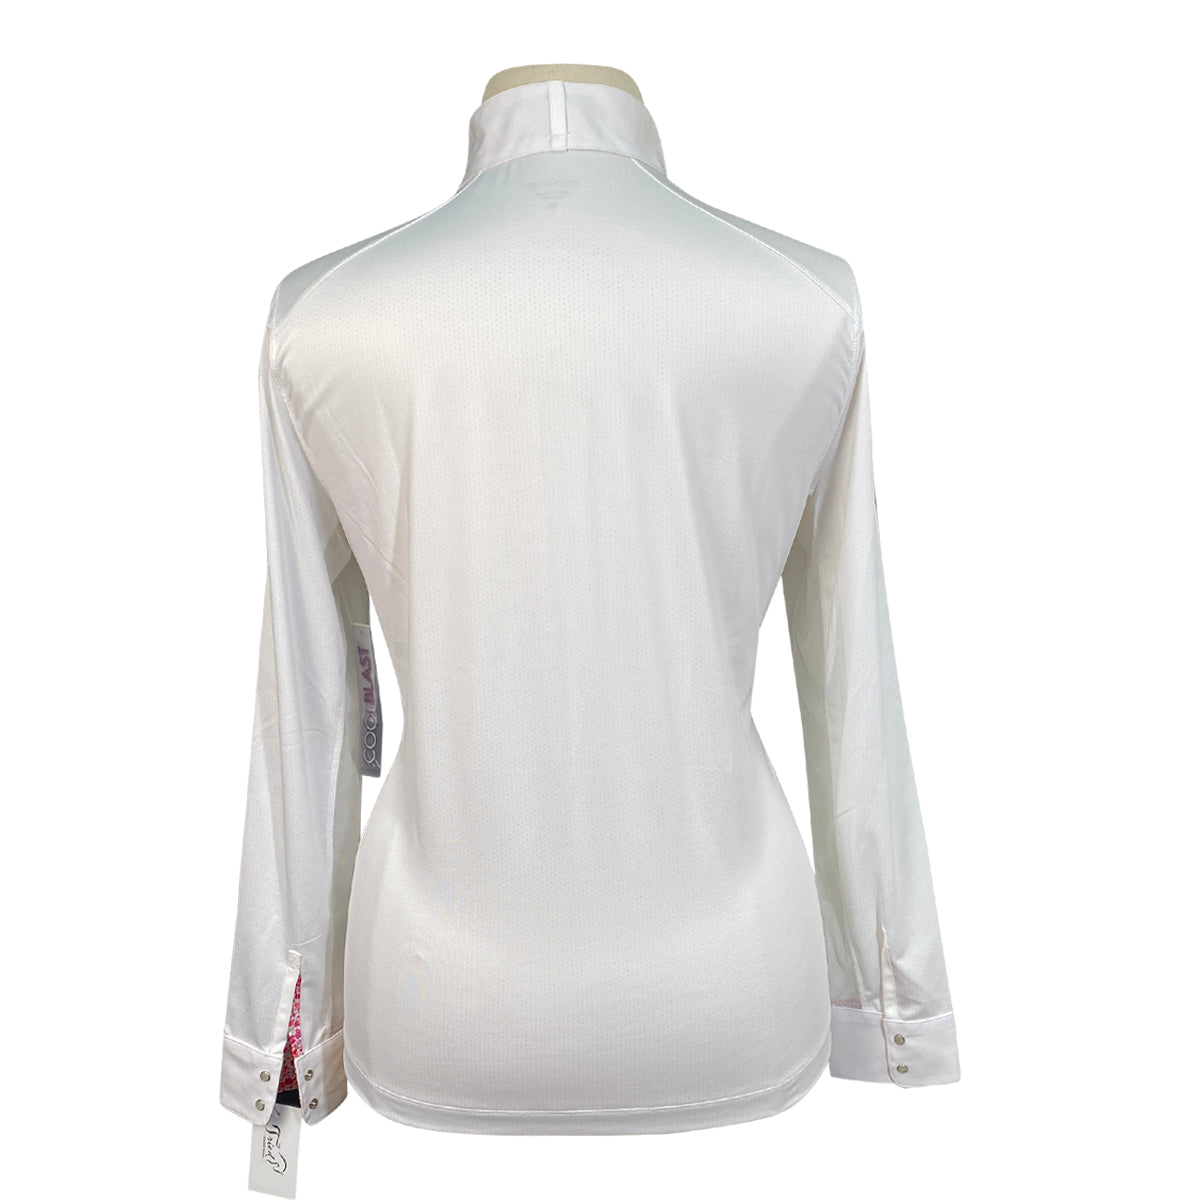 Dover Saddlery 'Coolblast' Show Shirt in White/Cherry Blossoms